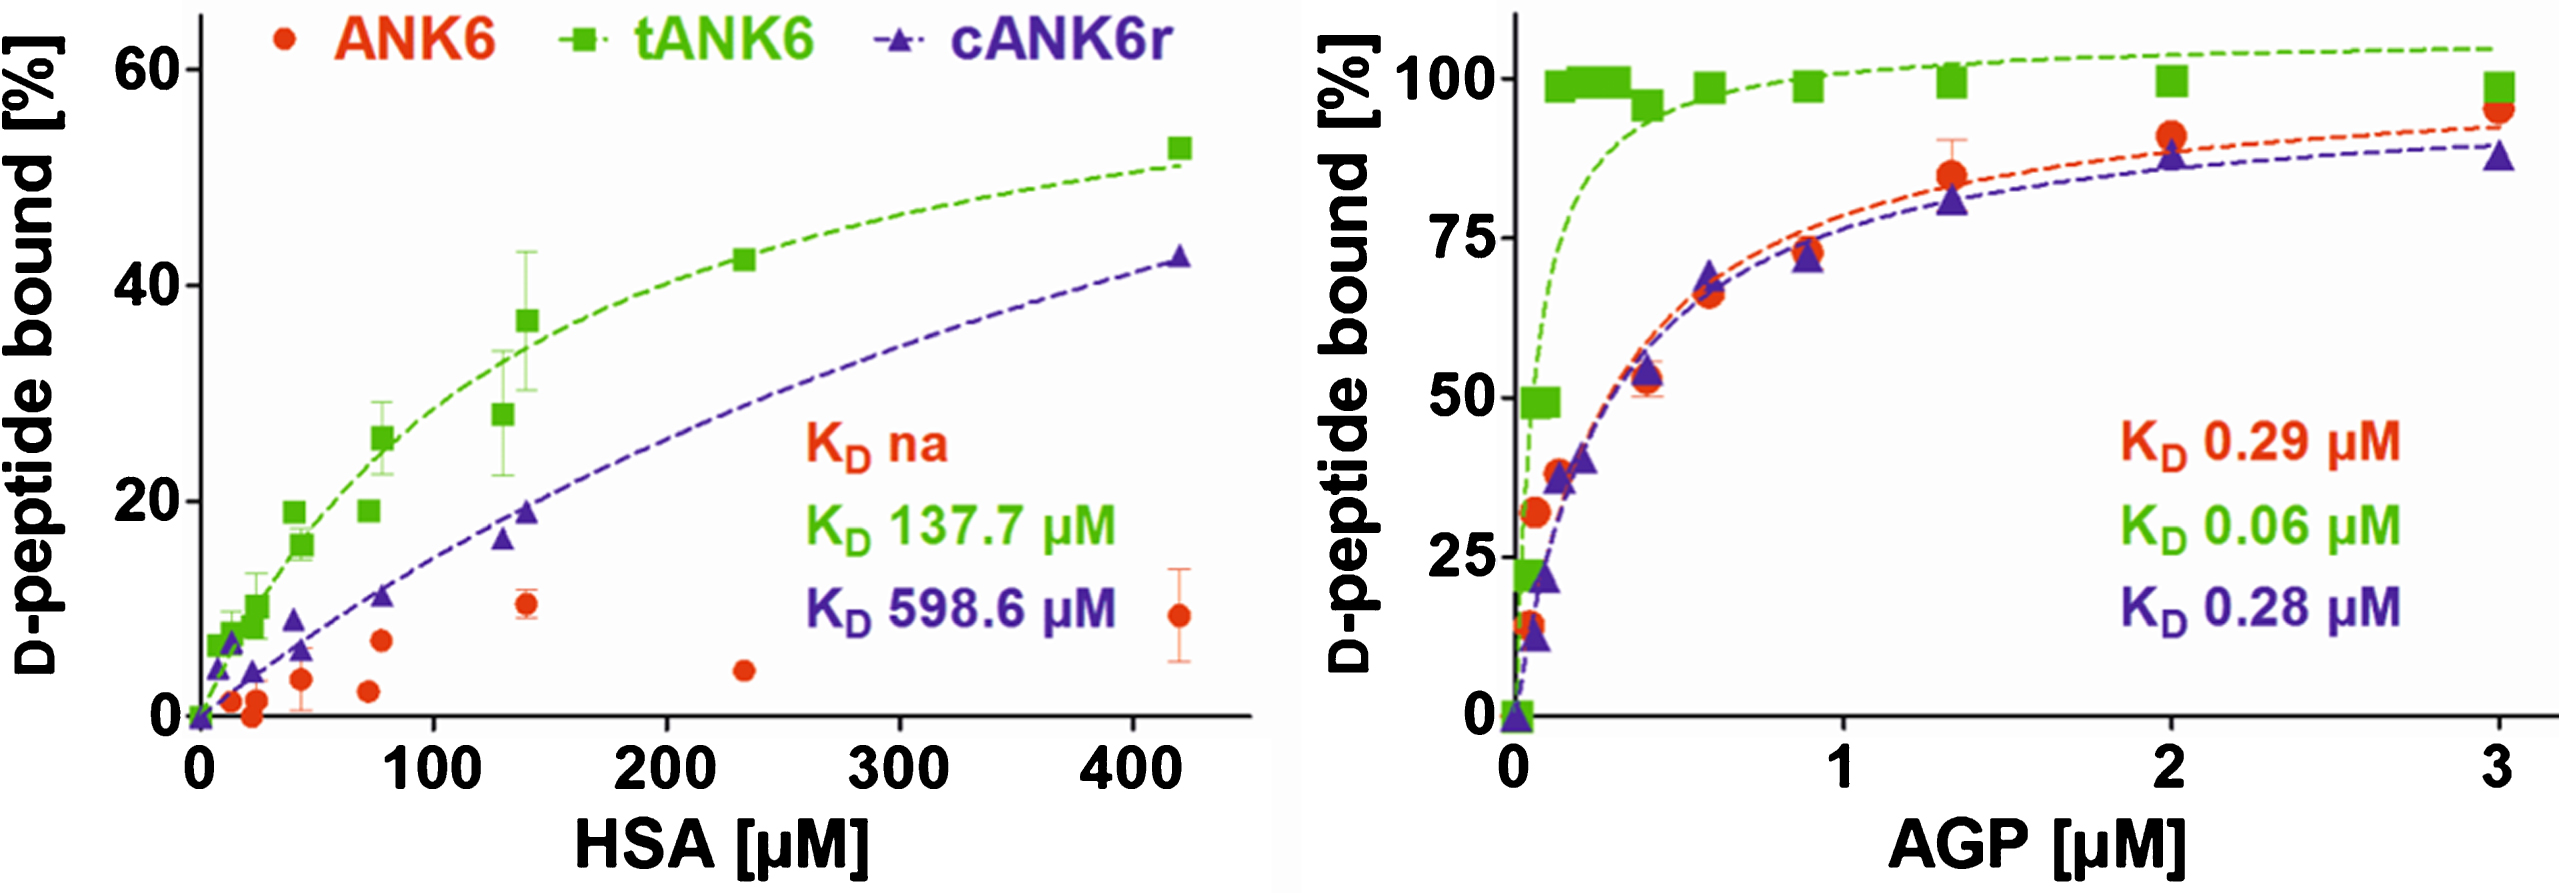 Binding to the plasma proteins HSA and AGP. ANK6’s (red circles), tANK6’s (green squares), and cANK6r’s (blue triangles) binding to the plasma proteins human serum albumin (HSA) and to α1 acid glycoprotein (AGP) was analyzed. The D-peptides were applied at 5μM while HSA and AGP concentrations were adjusted as follows: HSA 7.4μM to 420μM, AGP 0.04μM to 3μM. The unbound amount of ANK6, tANK6, and cANK6r (in %) to HSA or AGP respectively was plotted against the D-peptides’ concentrations. Datasets were fitted by nonlinear regression to determine the KD.